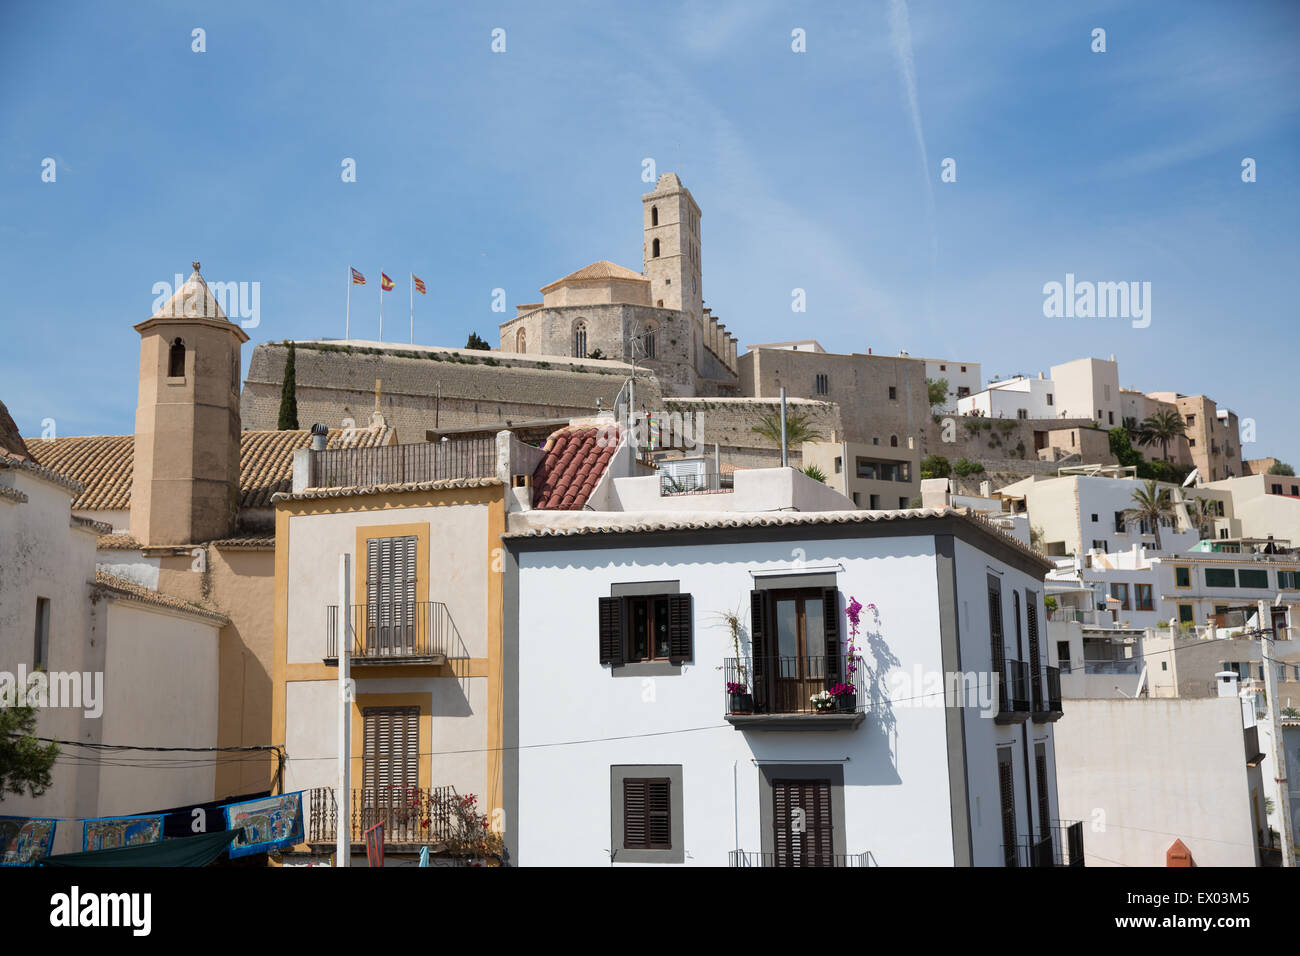 View of historic hillside building in old town, Ibiza, Spain Stock Photo